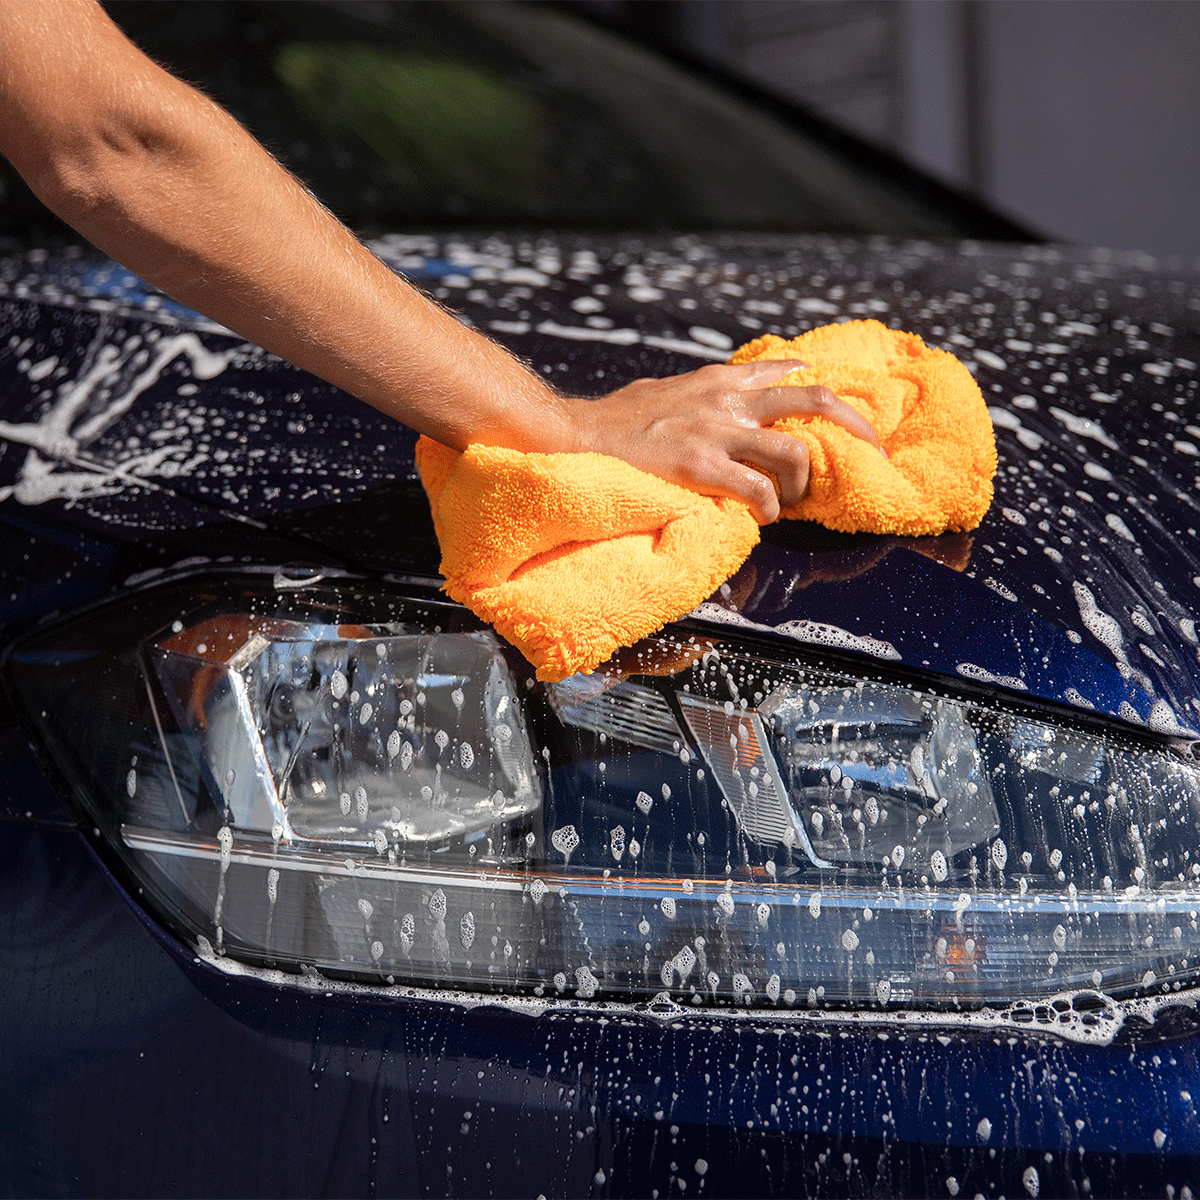 car cleaning